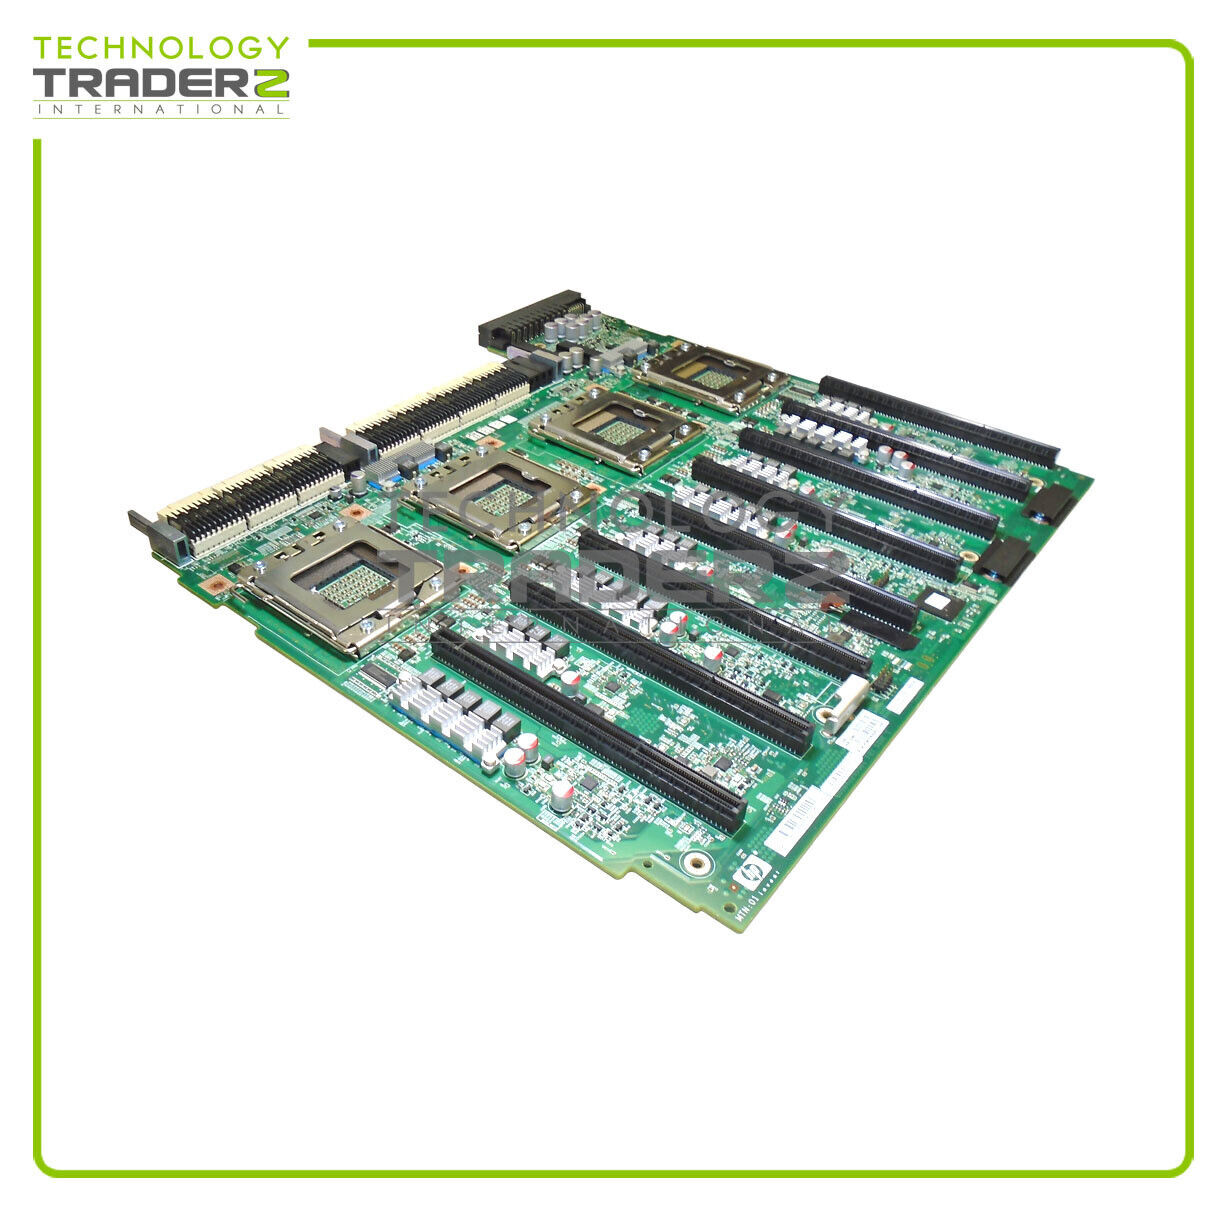 591197-001 HP CPU Memory Board for Proliant580 G7 583367-001 * Pulled *